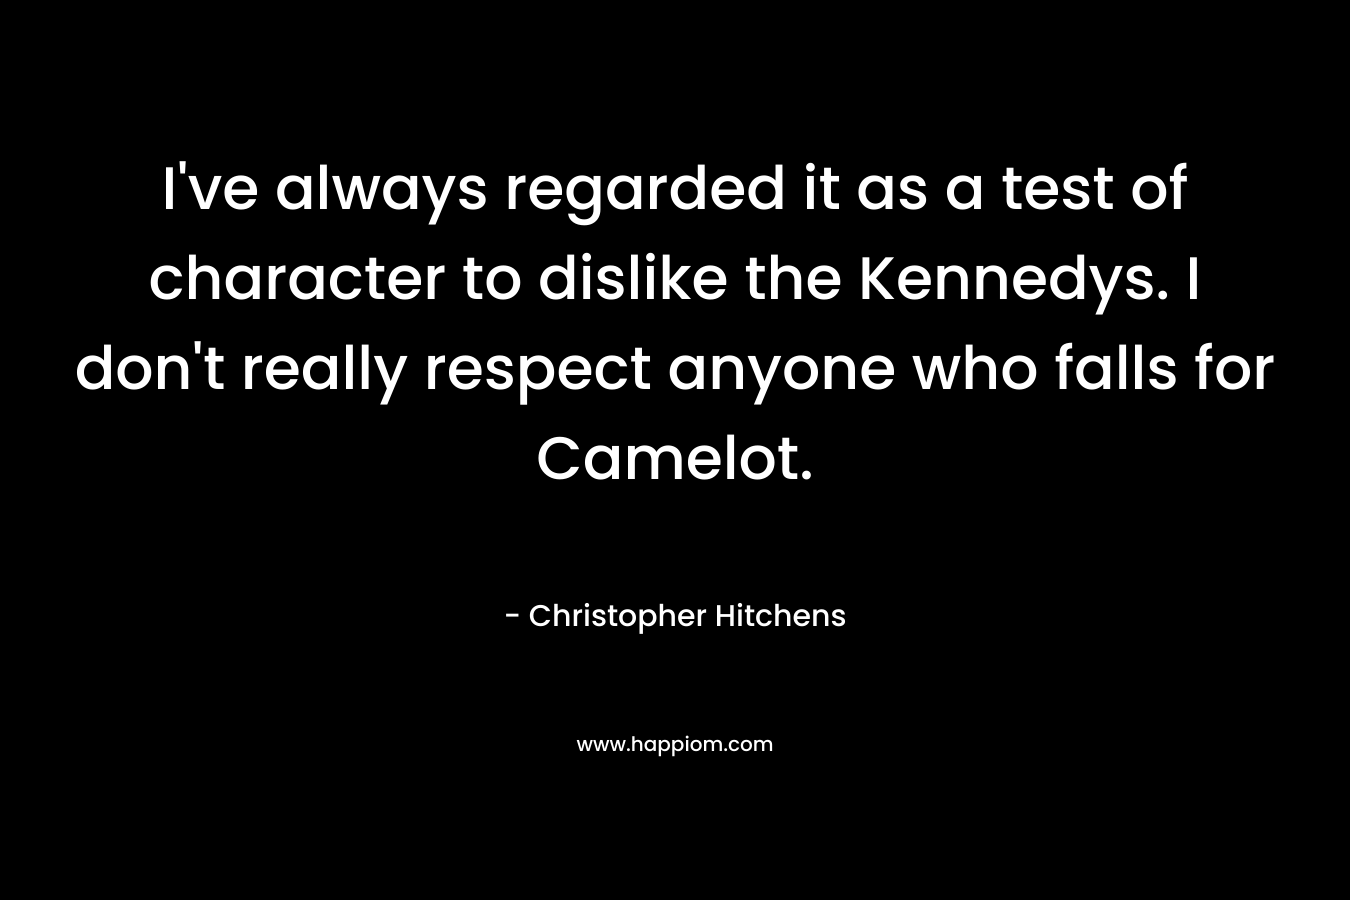 I've always regarded it as a test of character to dislike the Kennedys. I don't really respect anyone who falls for Camelot.